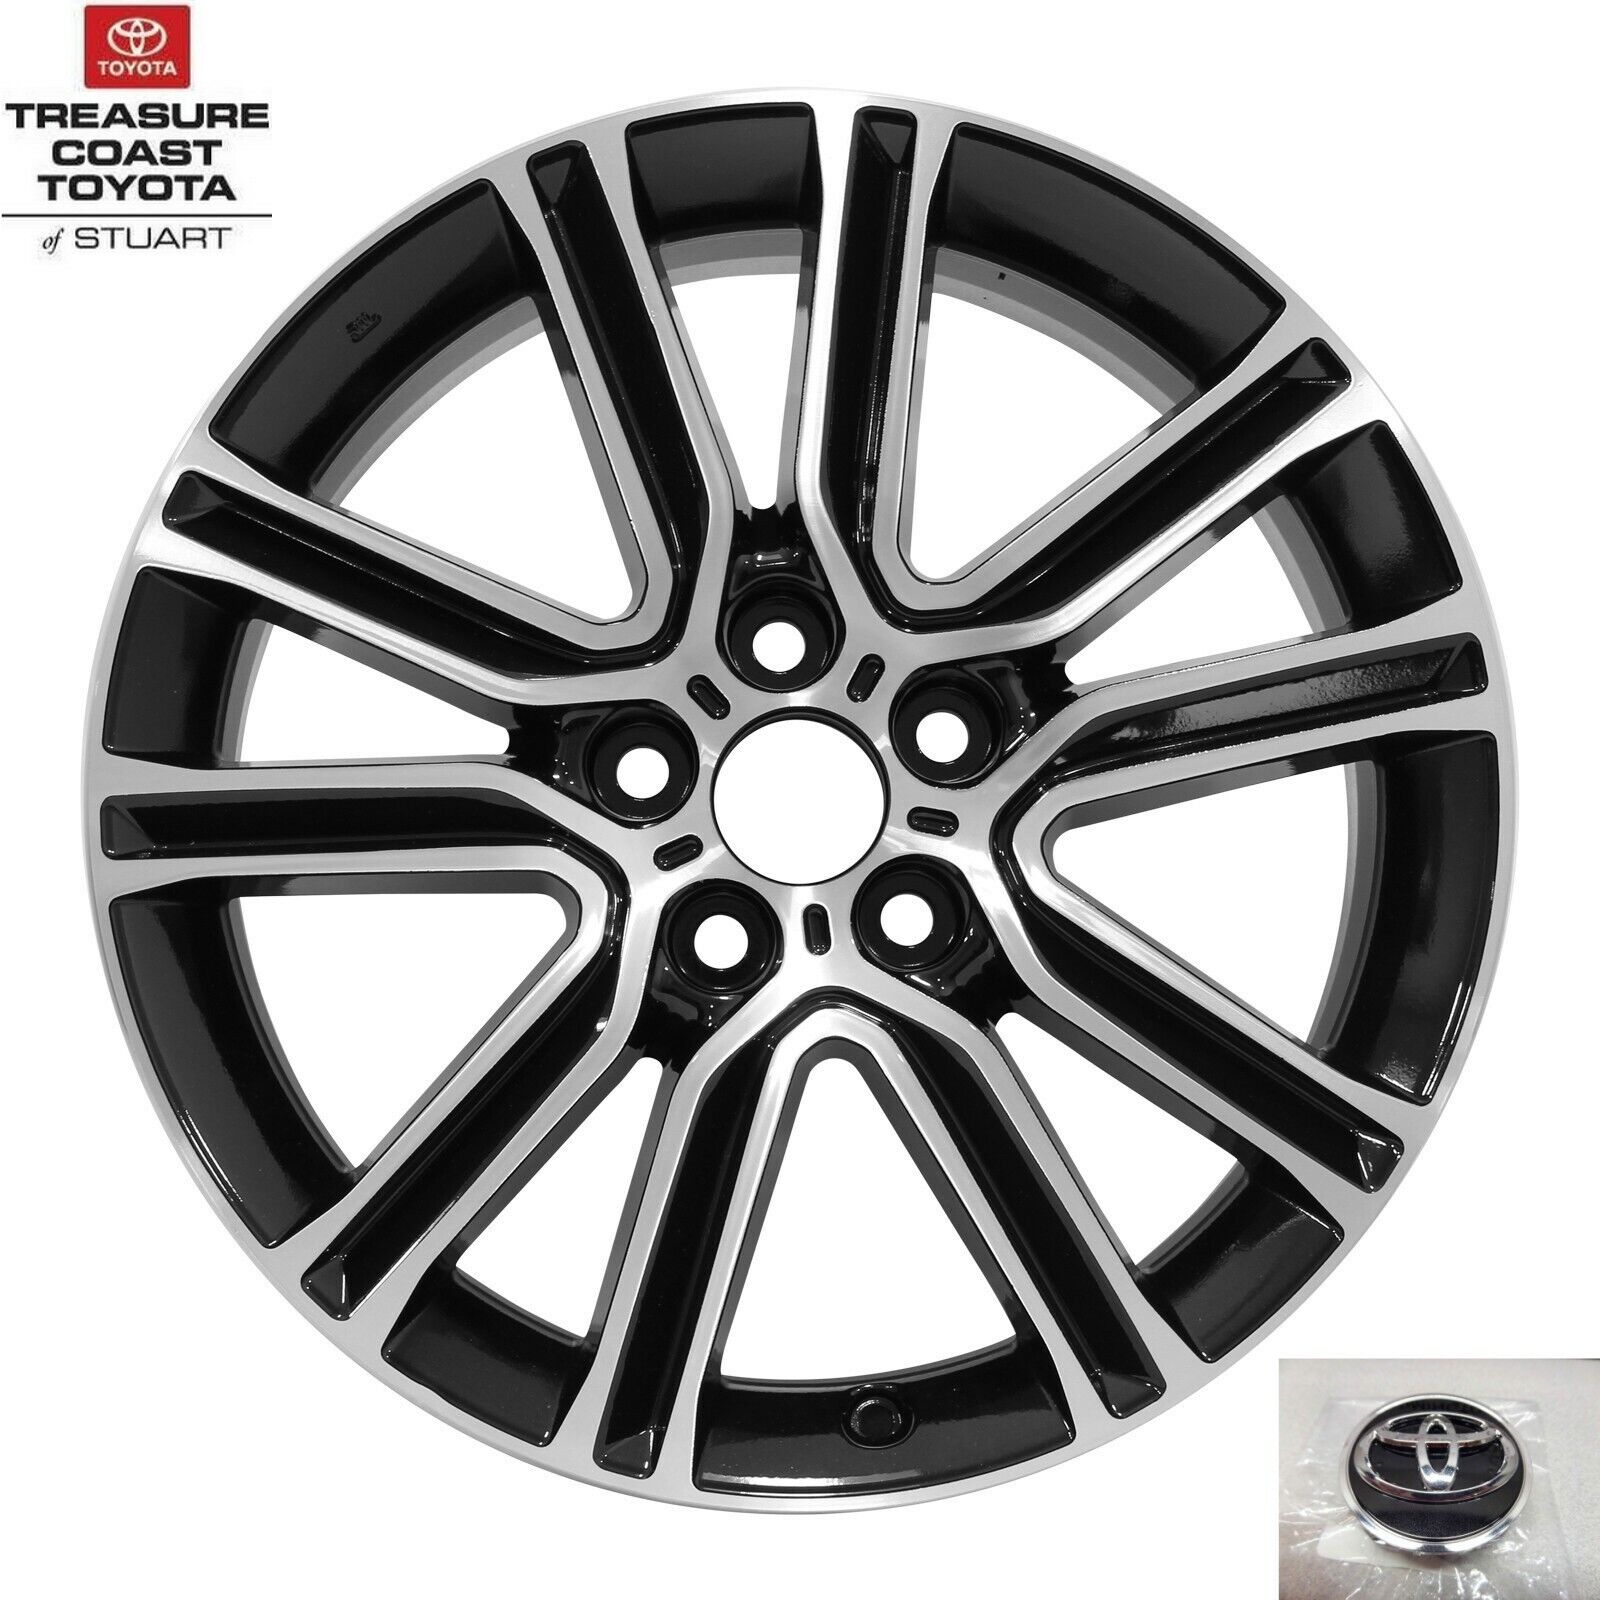 NEW OEM TOYOTA AVALON 2015 SPECIAL EDITION BLACK & SILVER 18'' WHEEL QTY 1 